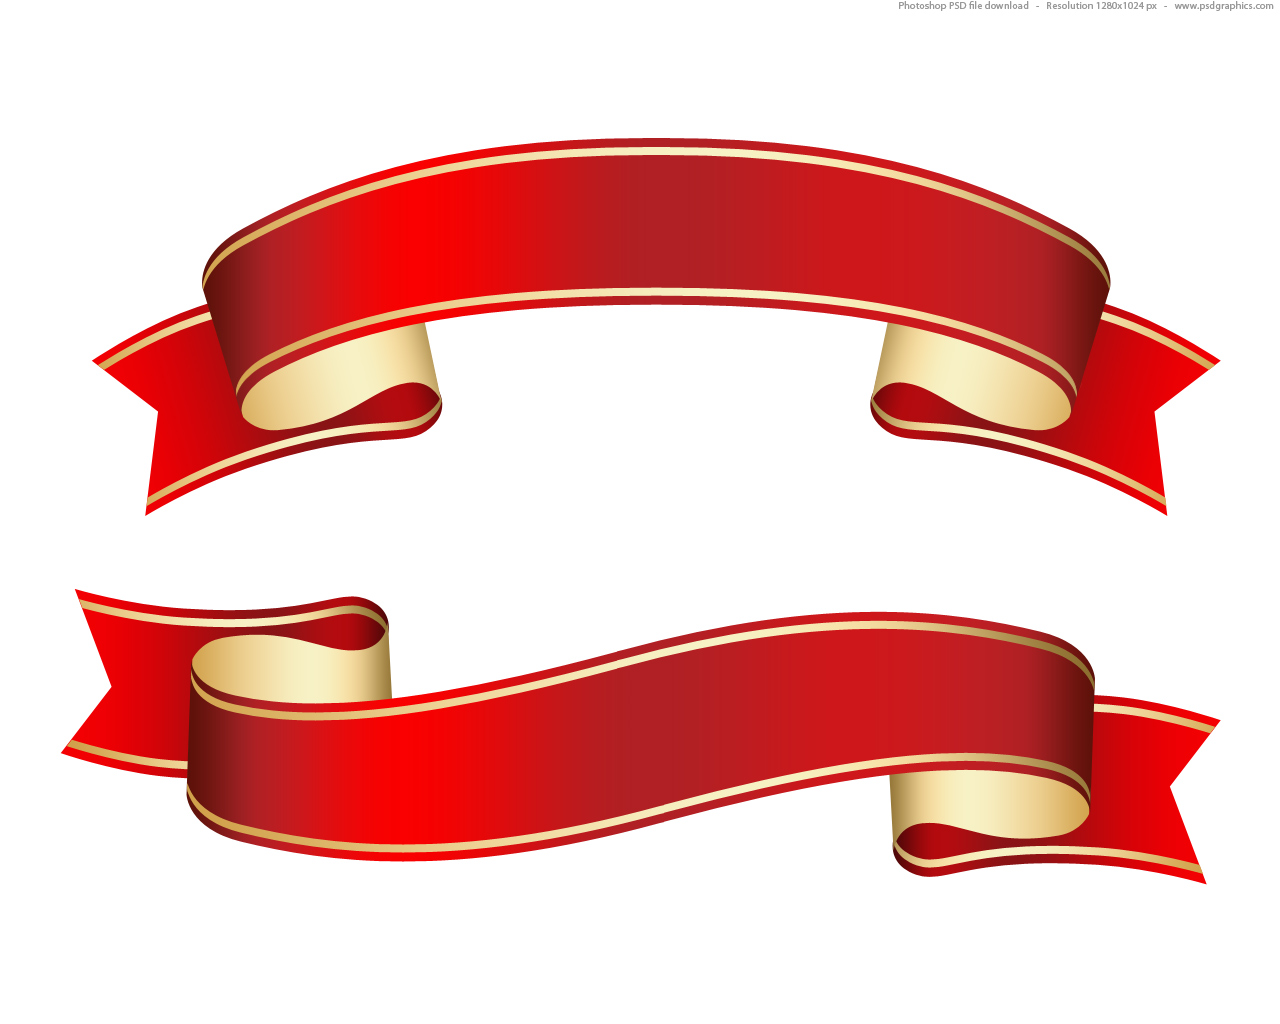 Red Ribbon Banner Clip Art free image